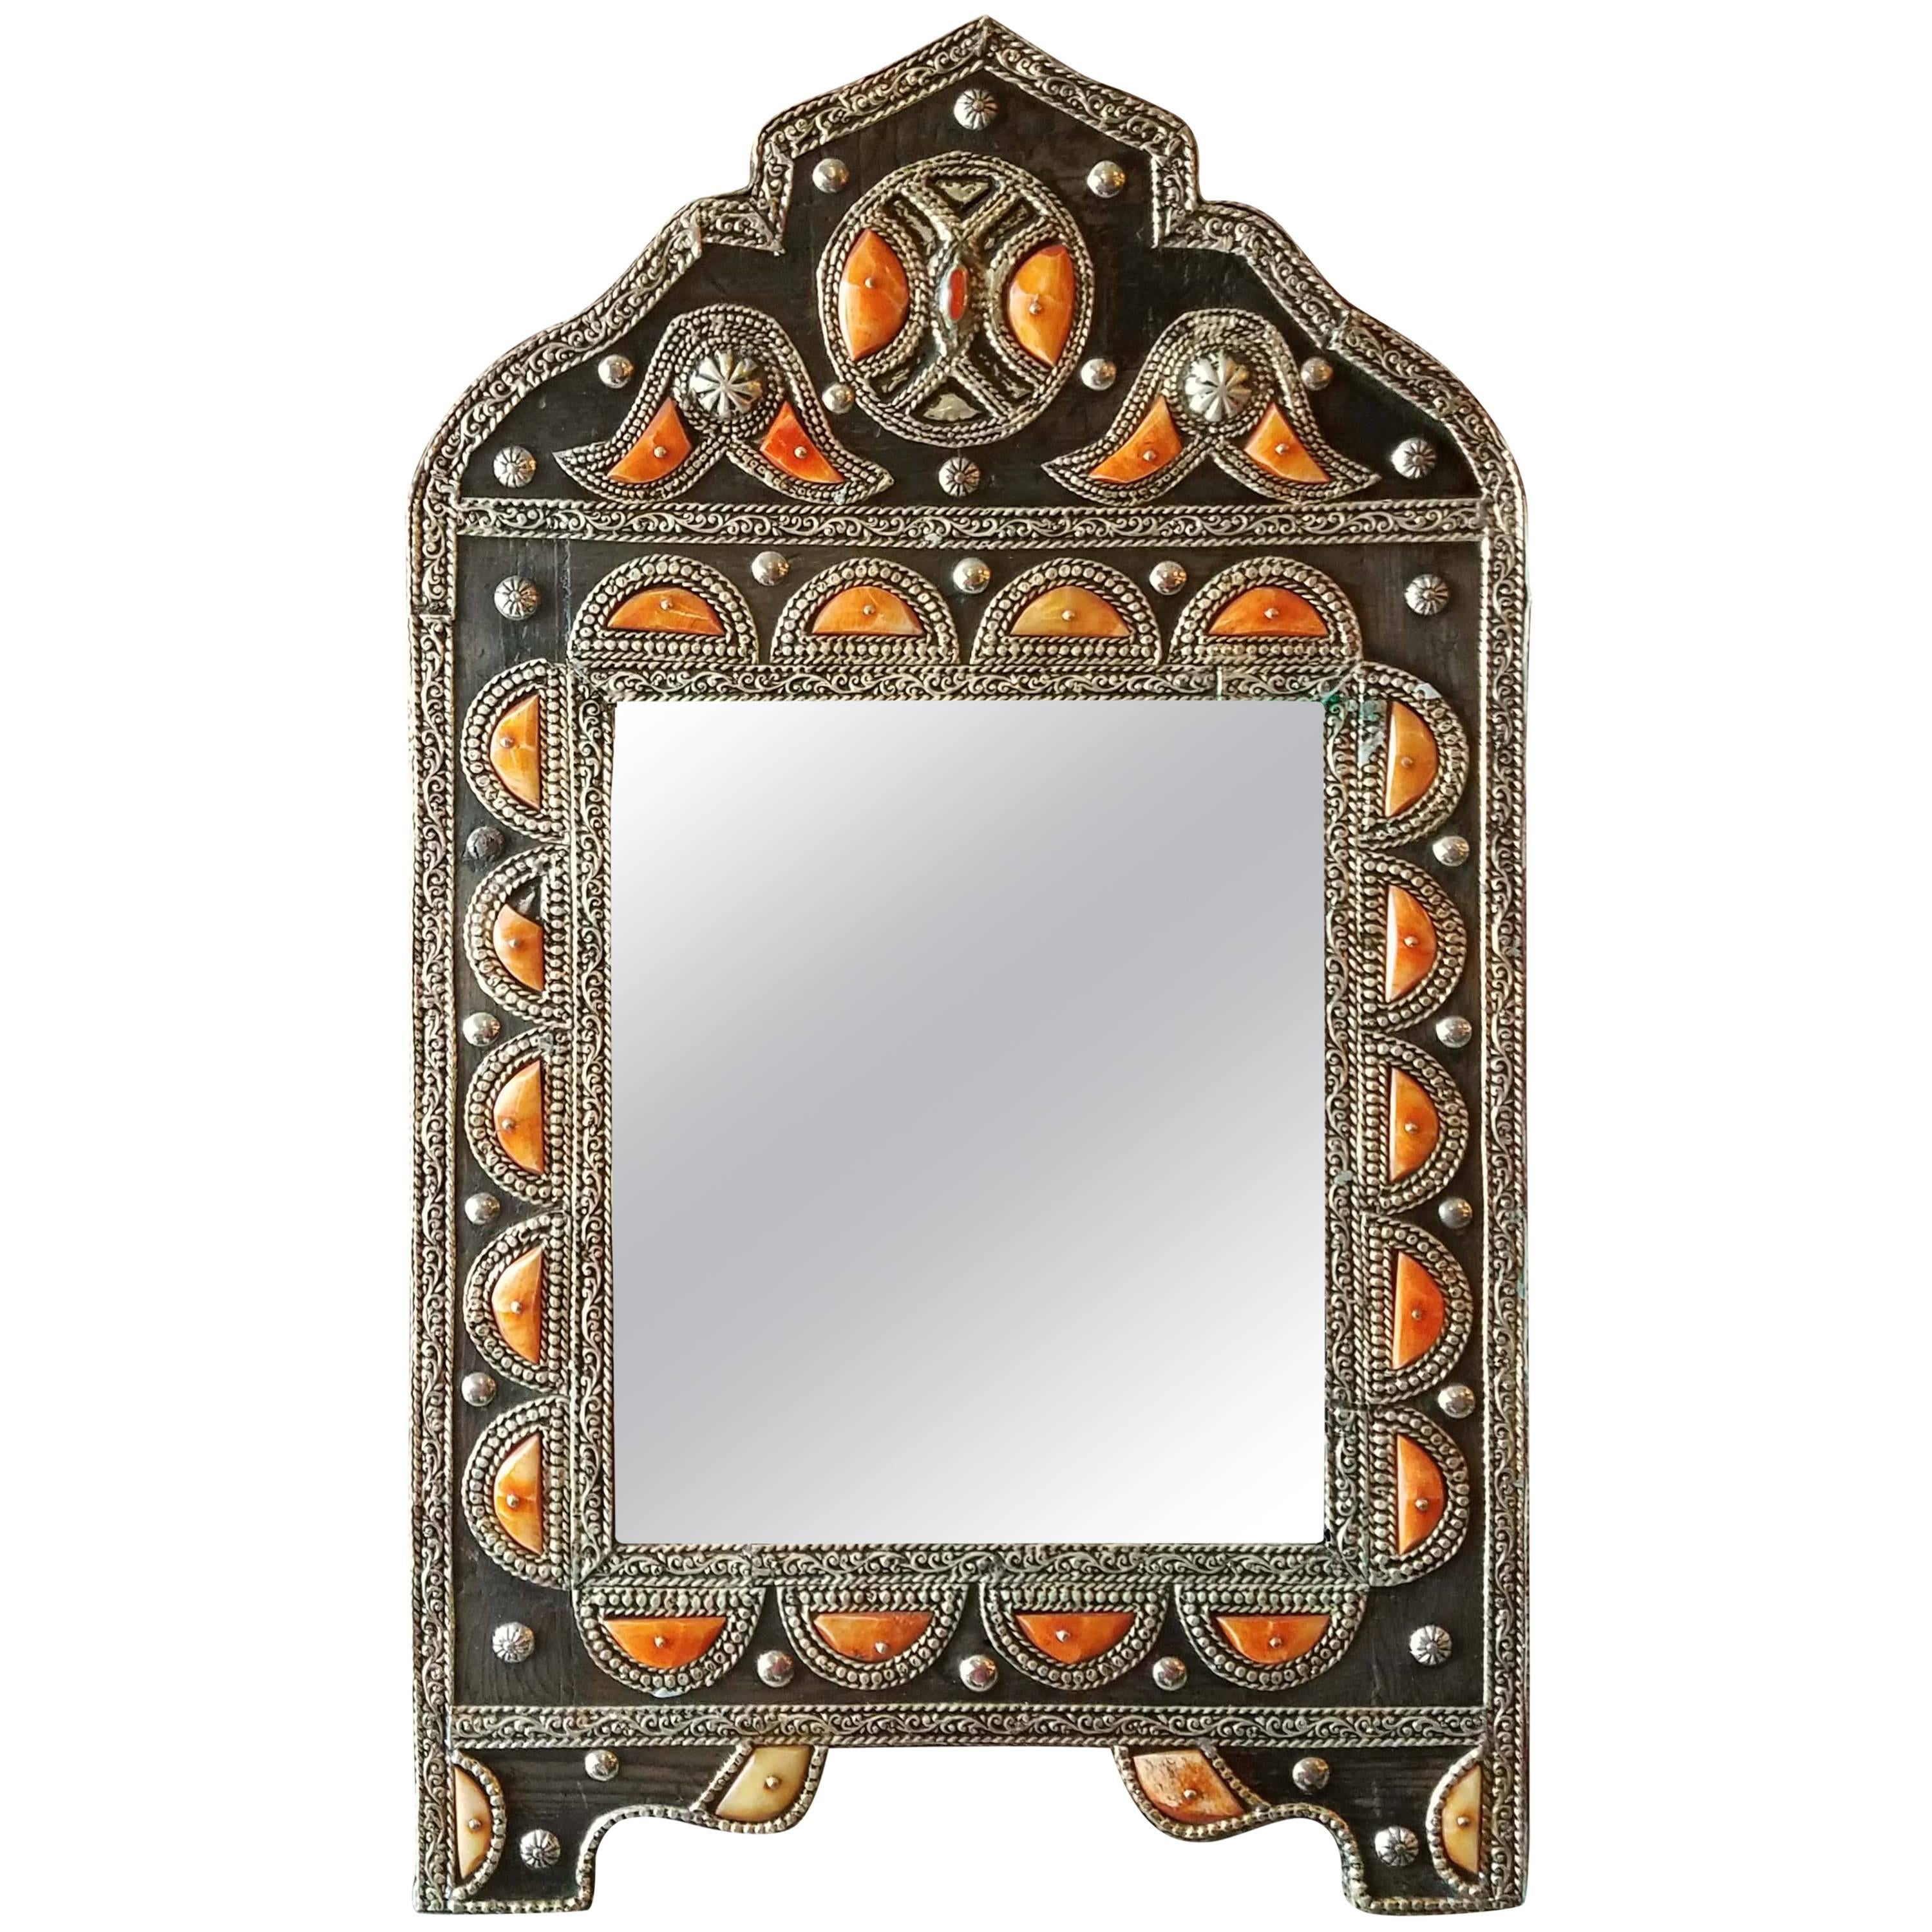 Kasbah Arched Moroccan Metal Inlaid Mirror, Marrakech For Sale